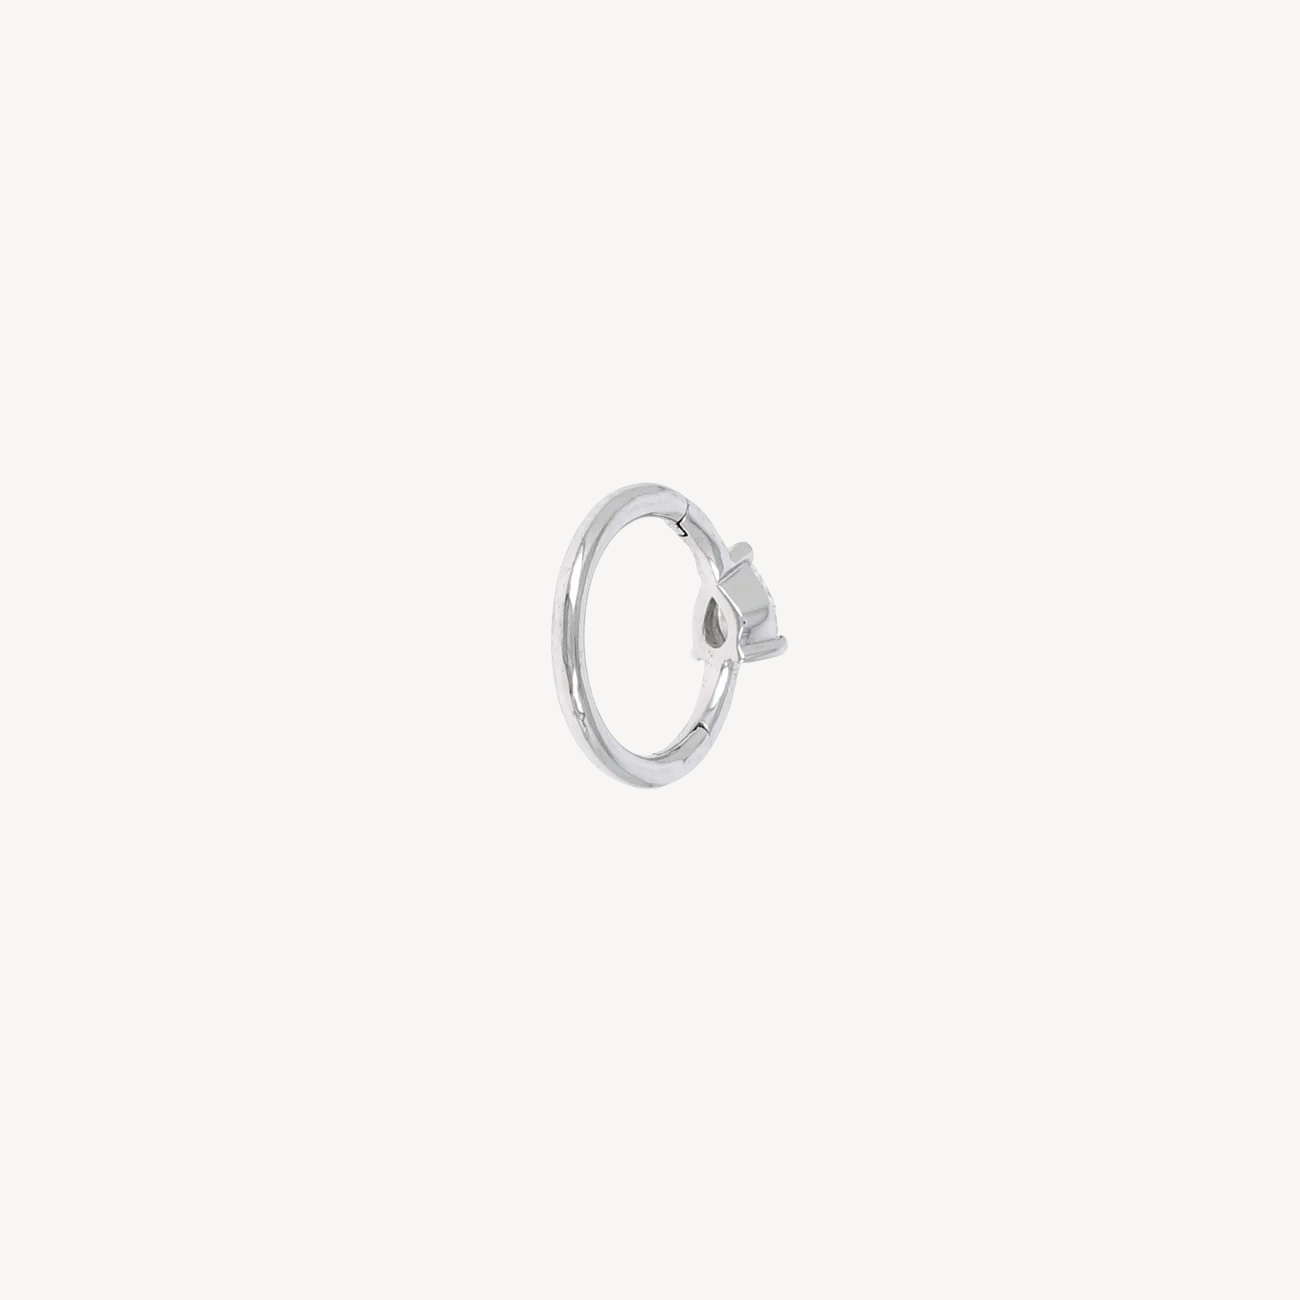 8mm 3.5x2.5mm pear white gold hoop